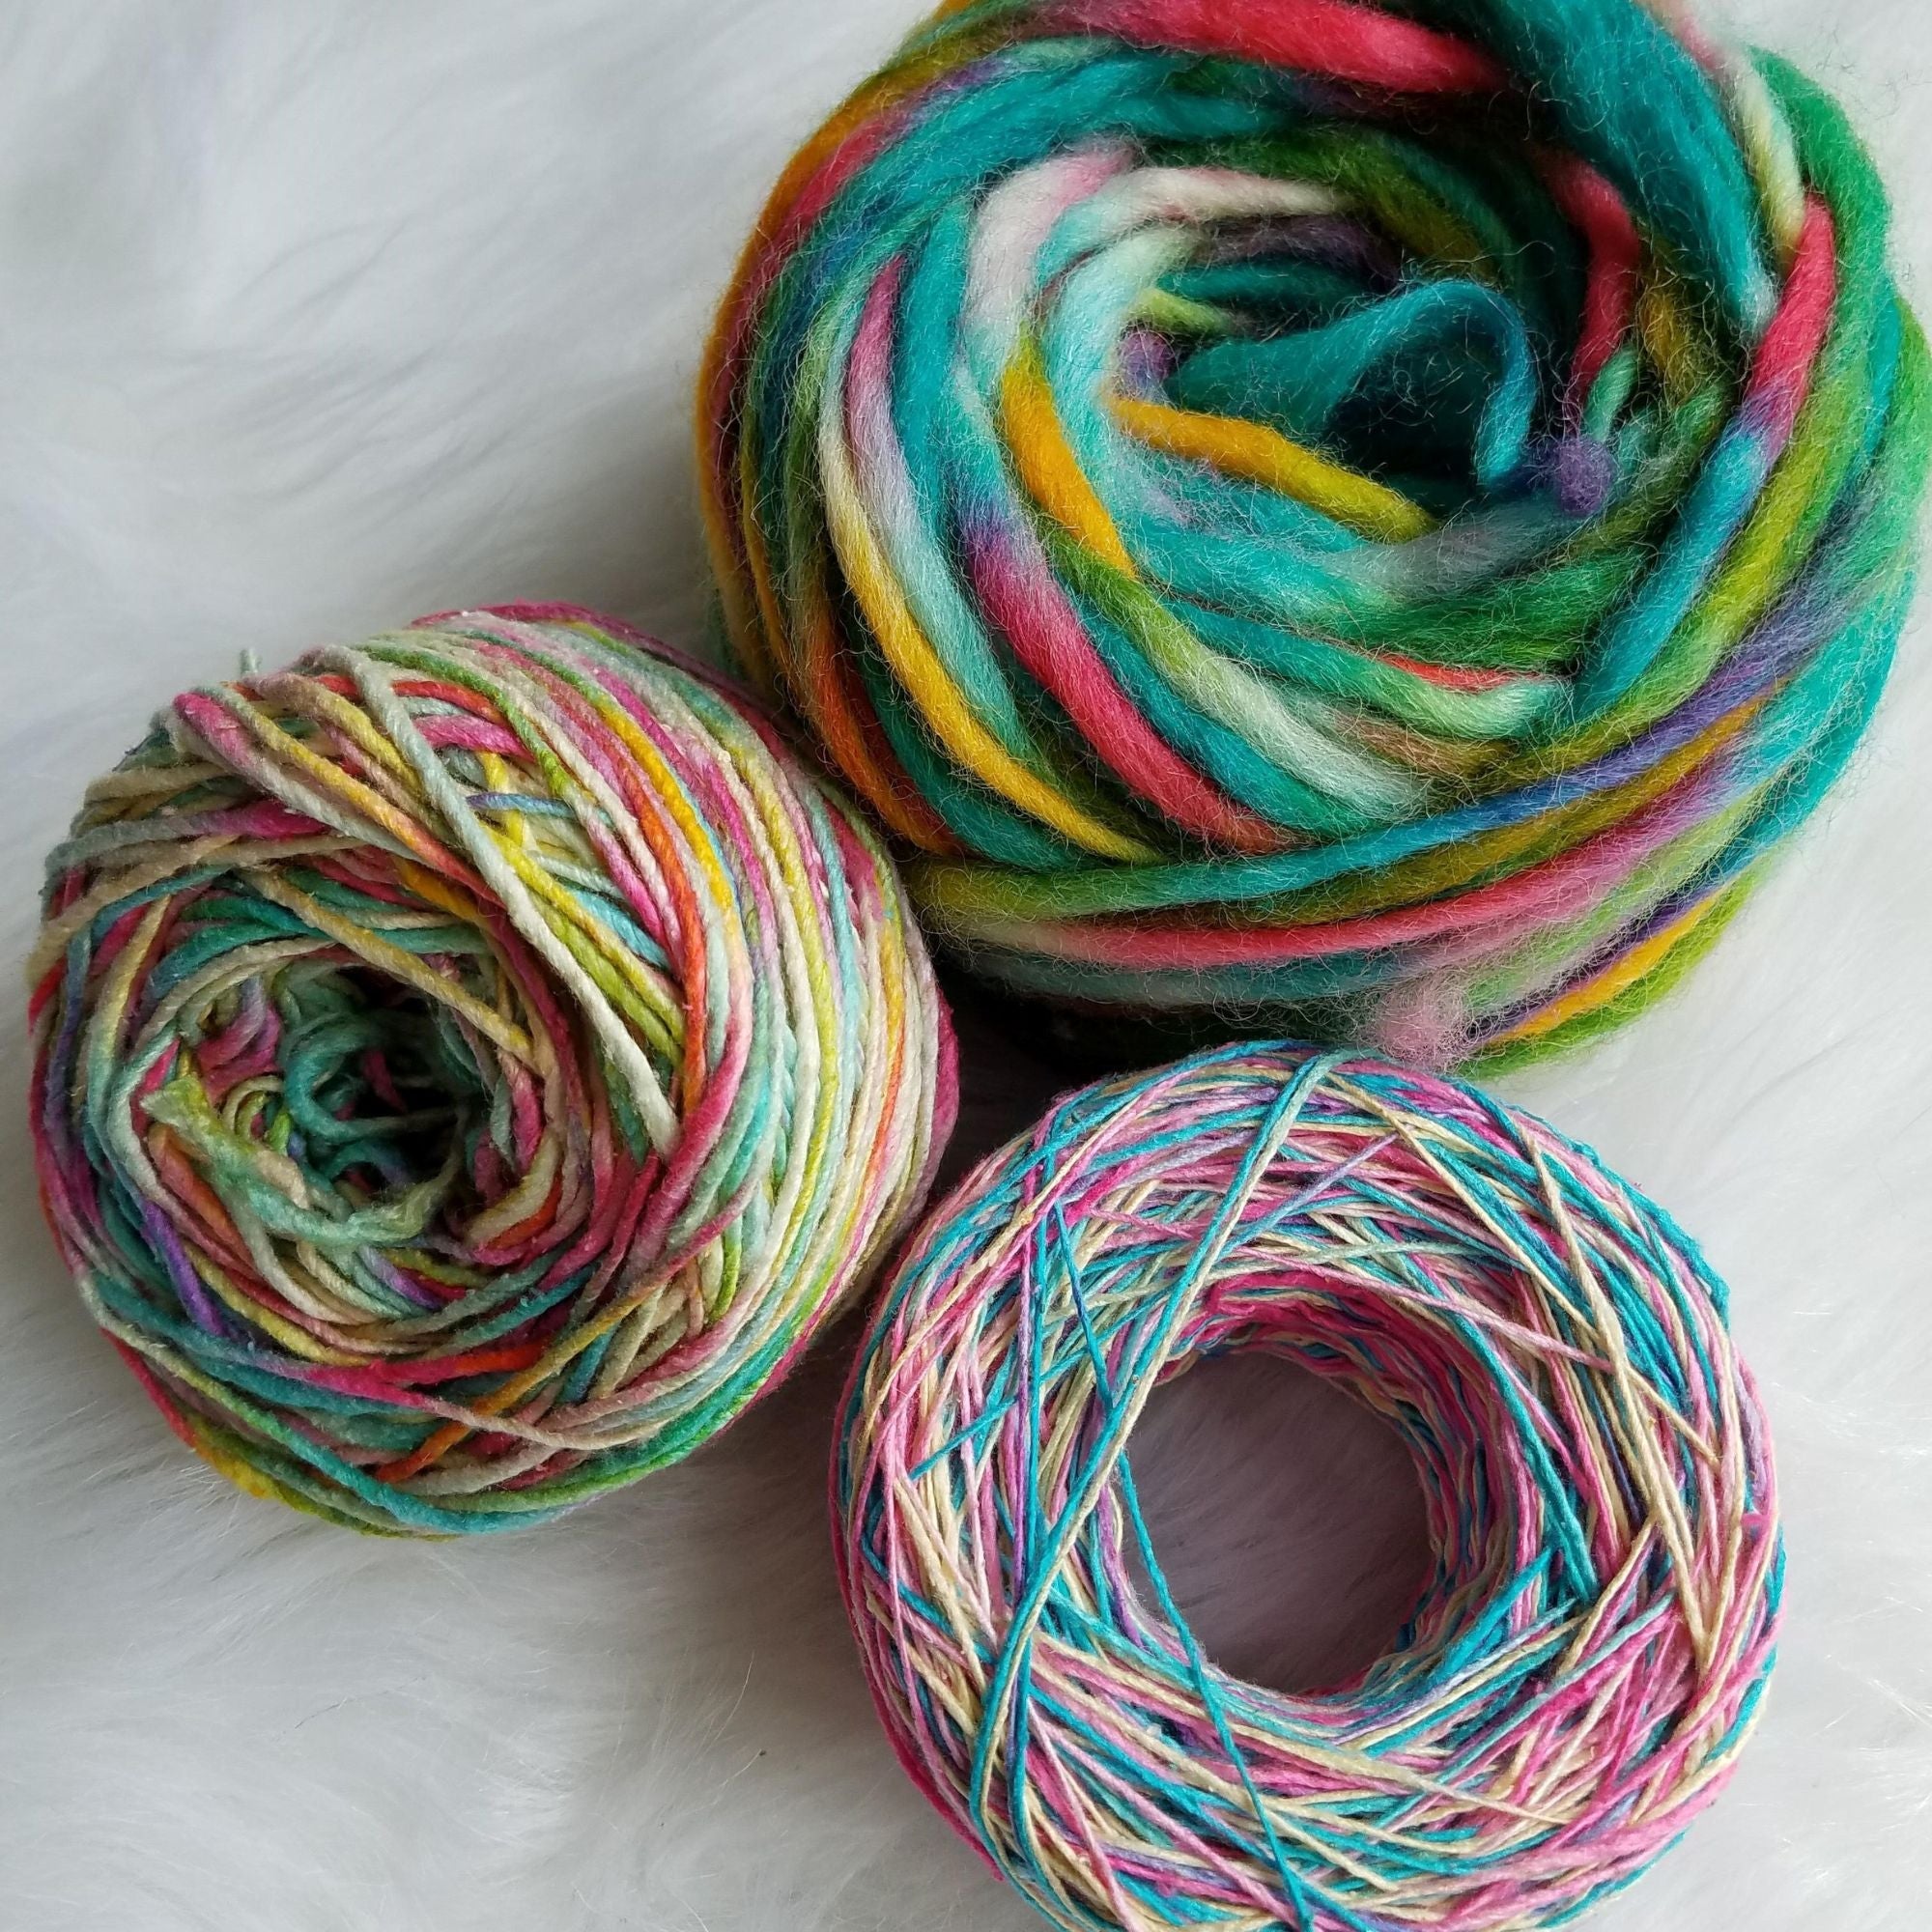 How to Dye Cotton Yarn Beautifully and Easy with Liquid Rit Dye